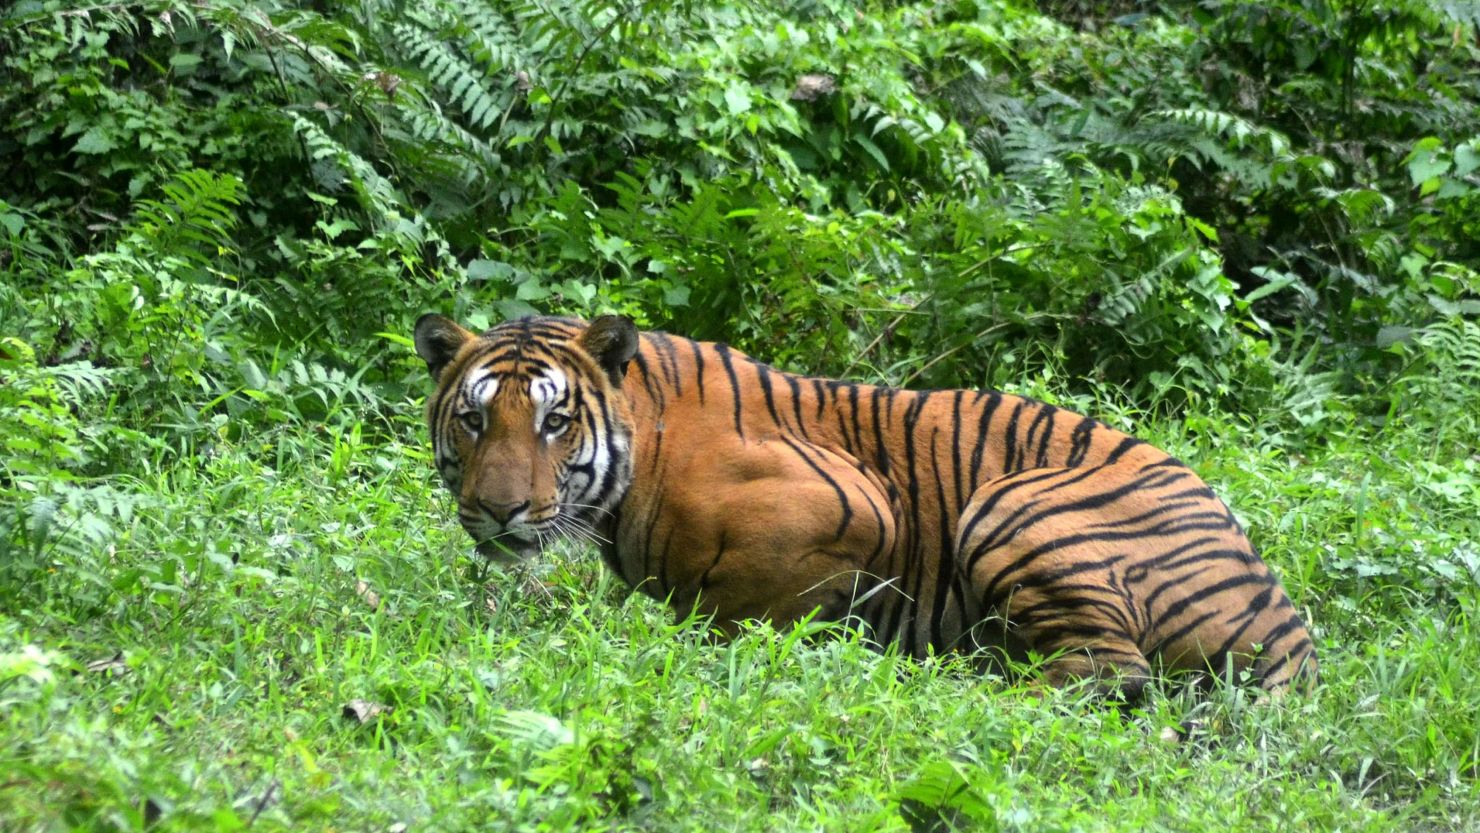 Where the wild things are: tiger spotting in India.